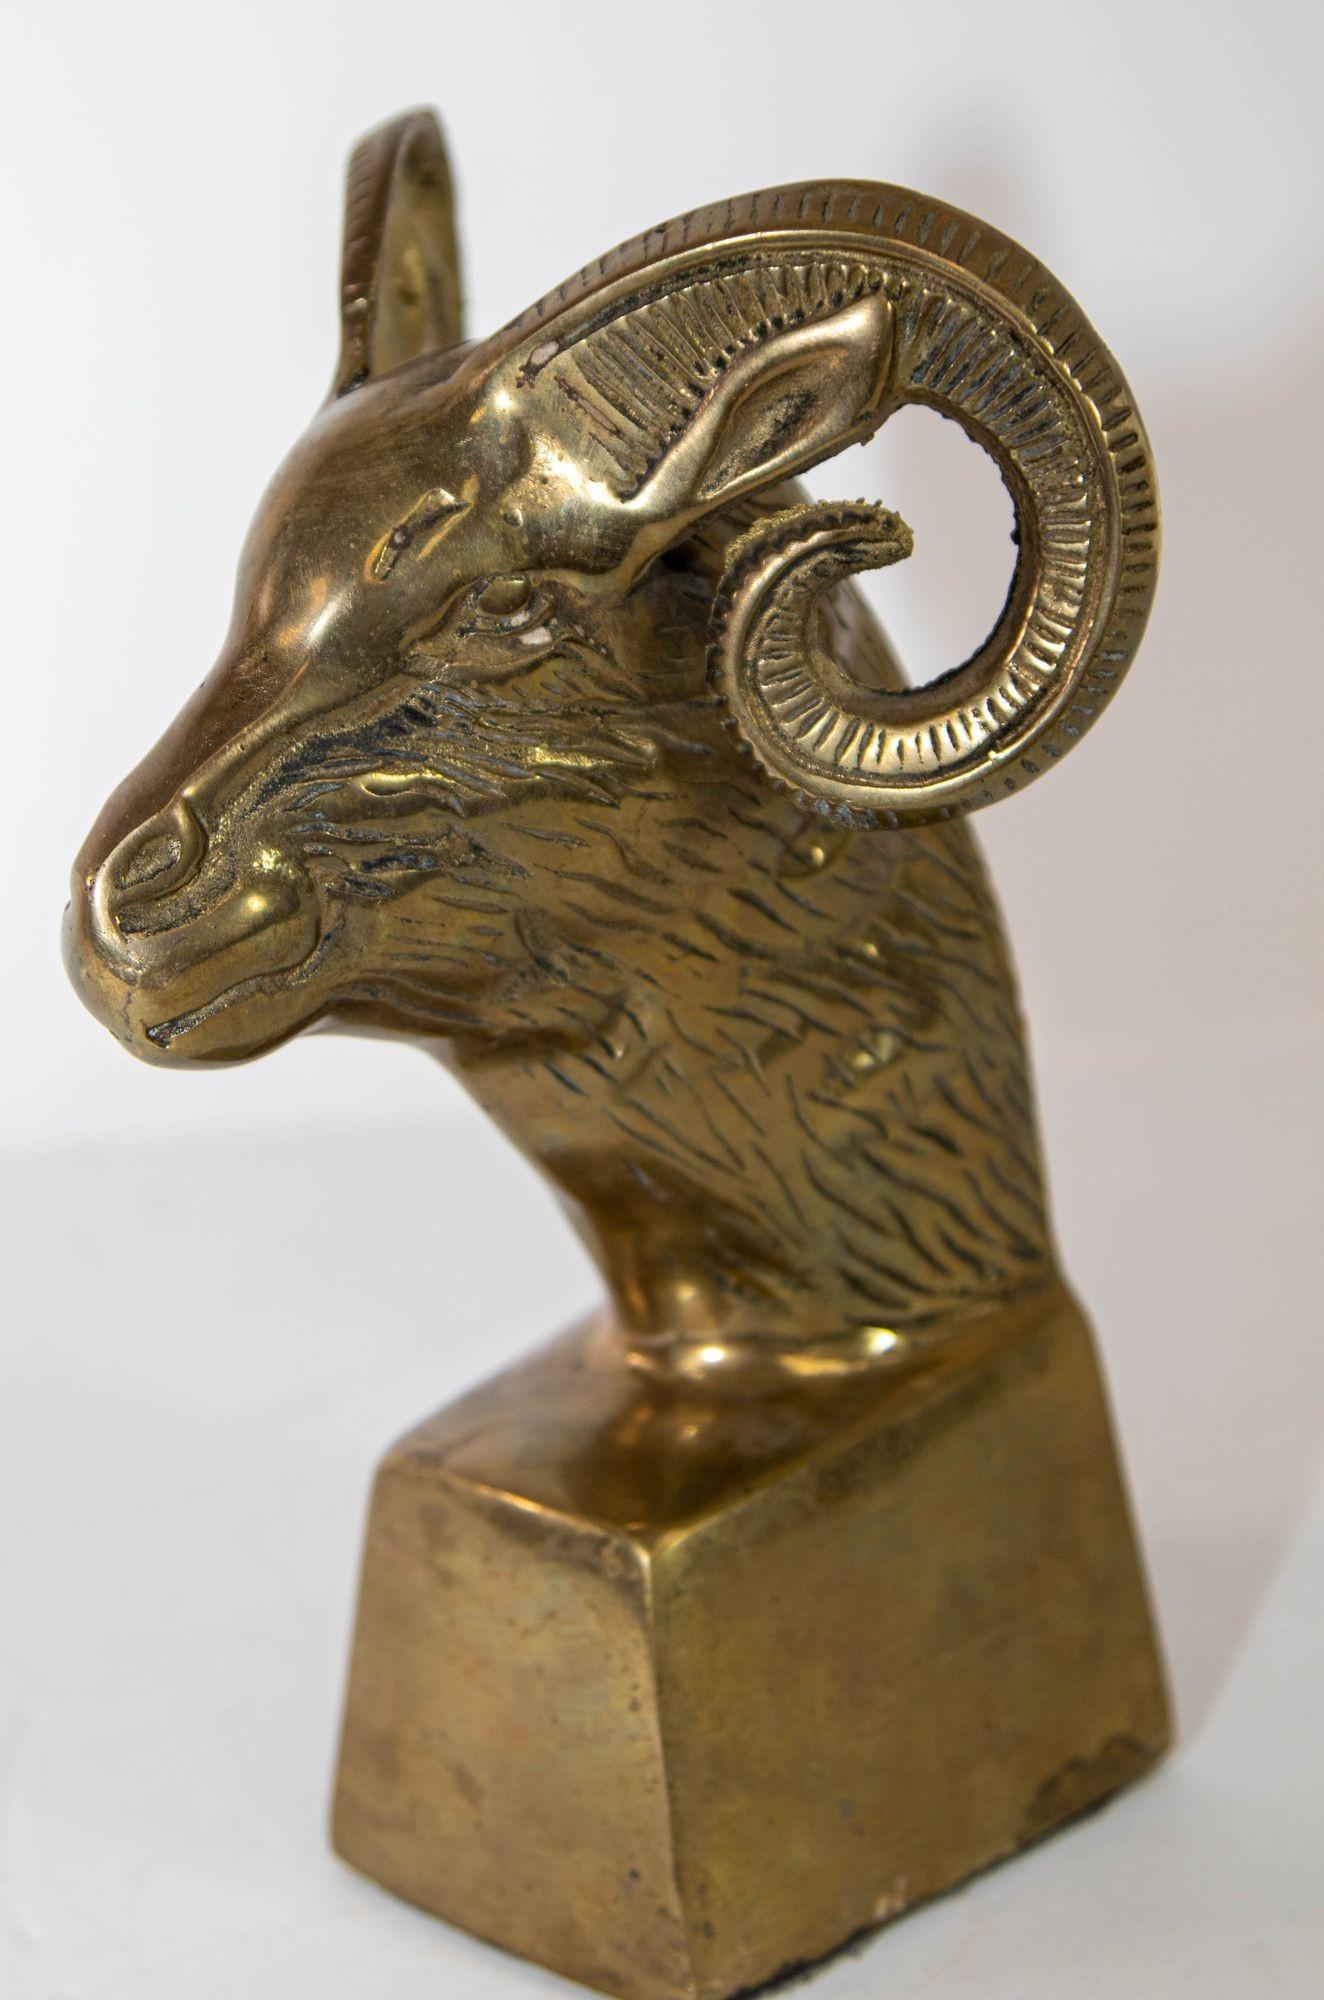 Mid-Century Modern Polished Brass Rams Head Paperweight or Single Bookend circa 1950s.
This Figurative Hollywood Regency cast brass ram bust sculpture will make an elegant addition to any space.
Large Art Deco style weighted sturdy brass paperweight